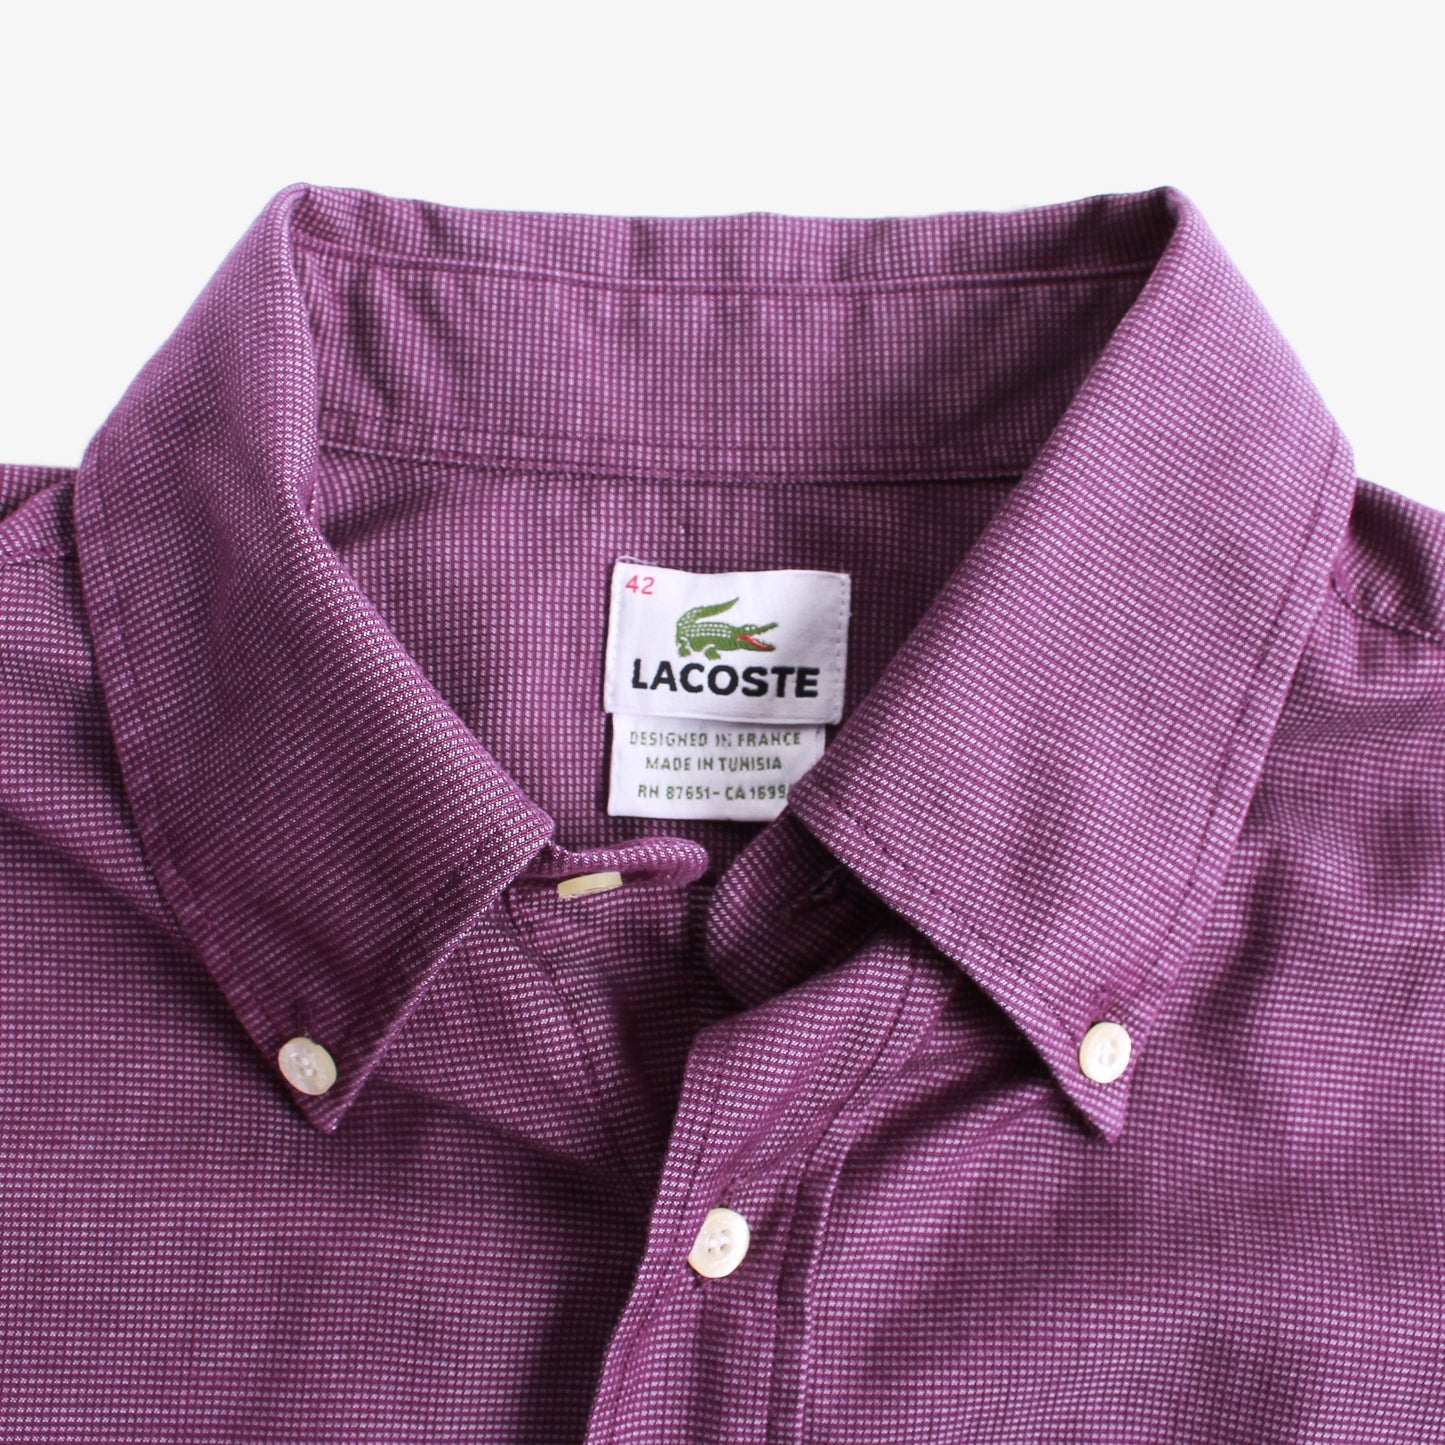 Vintage Lacoste Shirt - American Madness